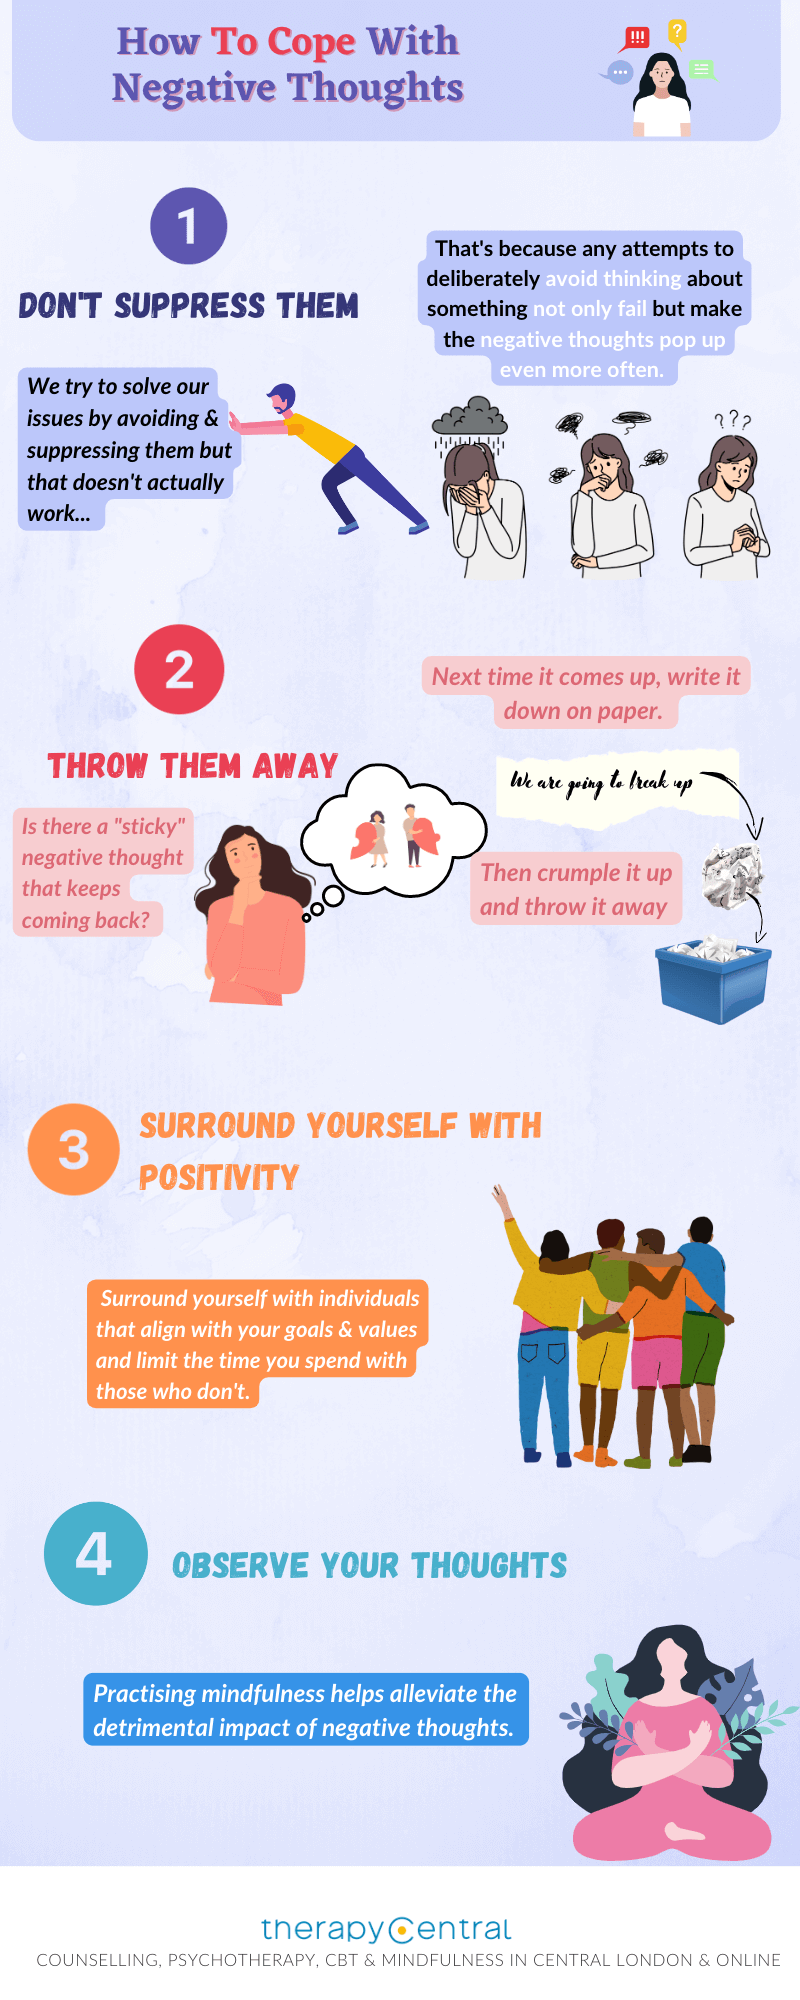 How To Cope With Negative Thoughts